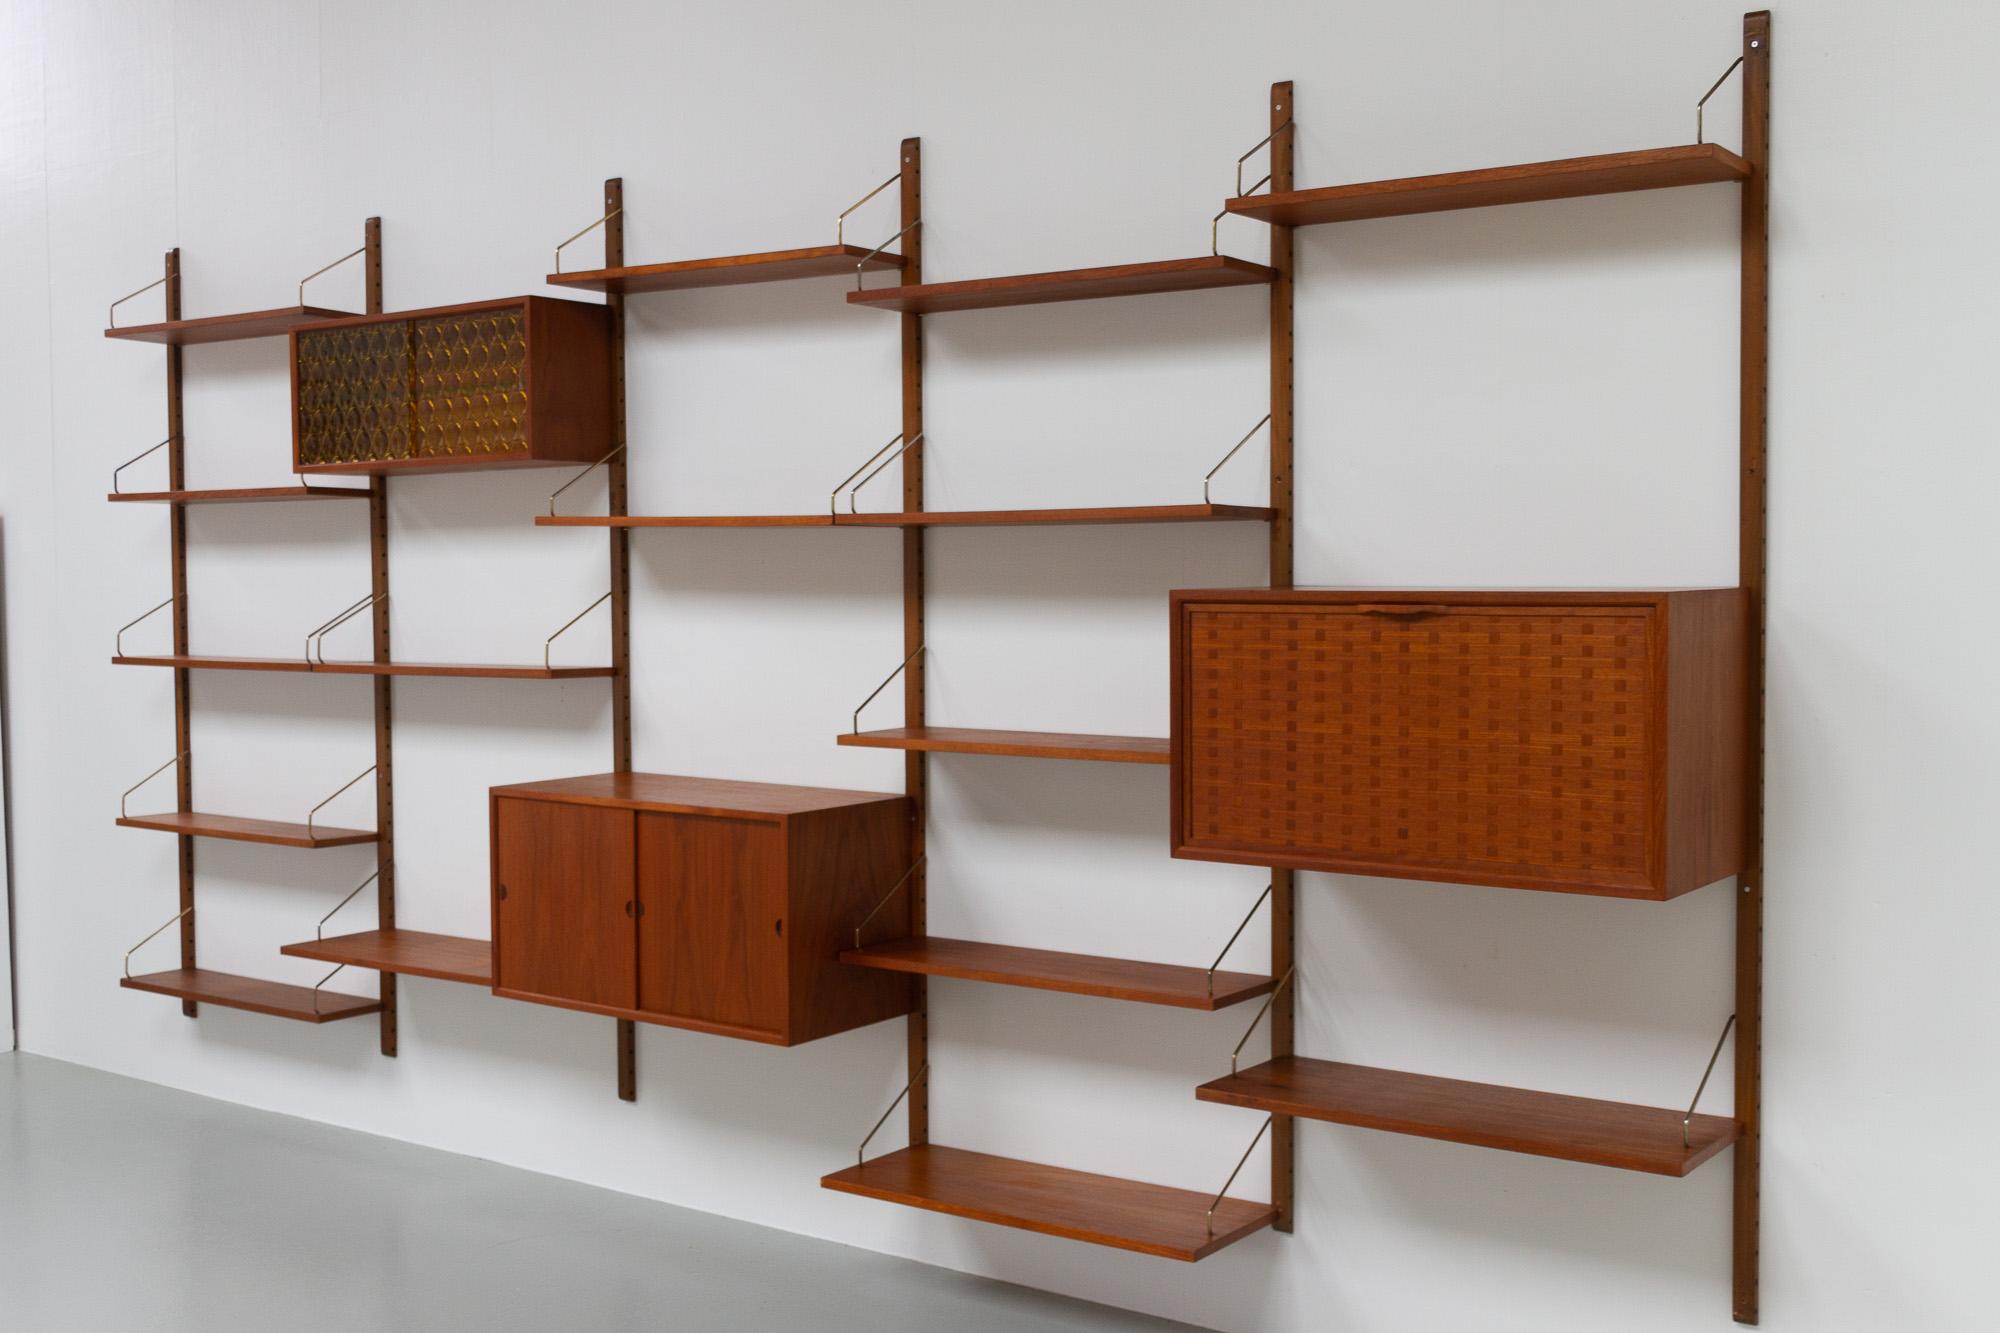 Danish Modern 5-Bay Modular Teak Wall Unit by Poul Cadovius for Cado, 1950s.

Mid-Century Modern 5 bay shelving system model Royal. This is an original vintage floating bookcase designed in 1948 by Danish architect Poul Cadovius. 
Cadovius had